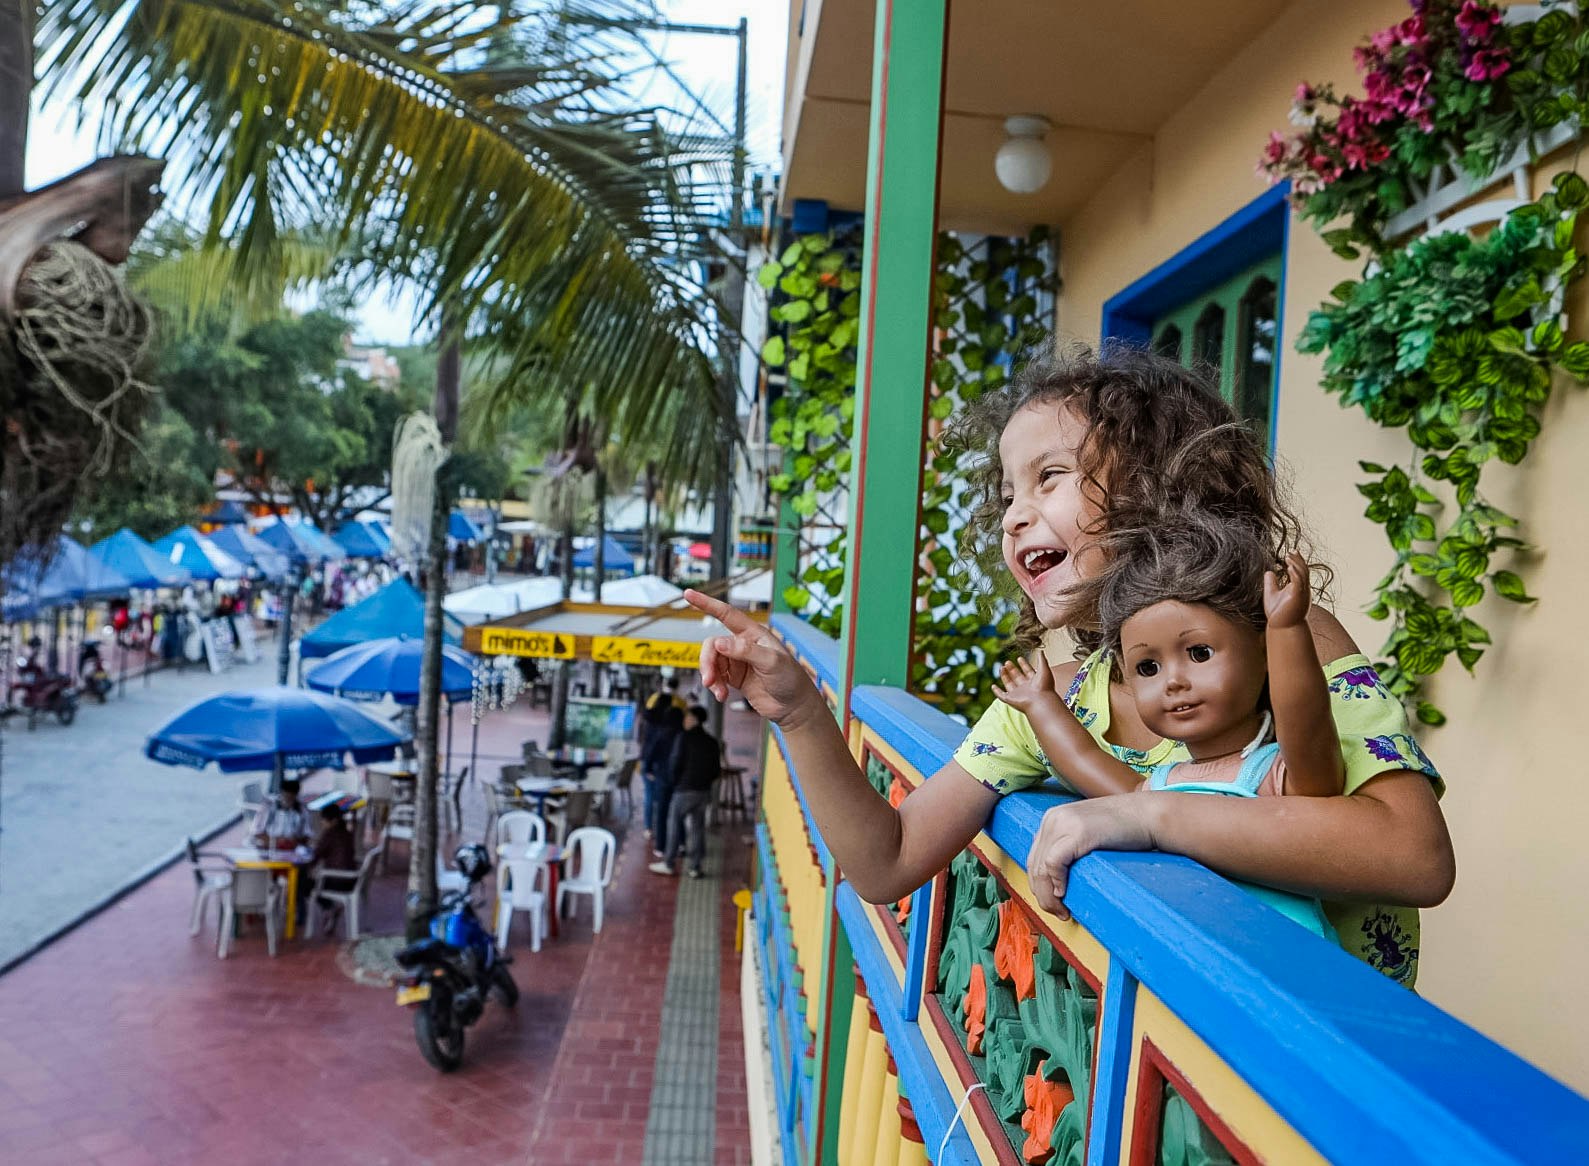 A little girl with curly brown hair and an American Girl doll who has the same light brown skin tone and wavy brown hair laughs and points to something just out of the frame. She is on a blacony with blue, green, teal, and orange railings, with tan stucco walls behind her and a shelf overflowing with vines and flowers. On the street below are long rows of blue tents over street vendors and blue umbrellas over white plastic tables and chairs for nearby cafes. Palm trees hang over the brown tiled sidewalks